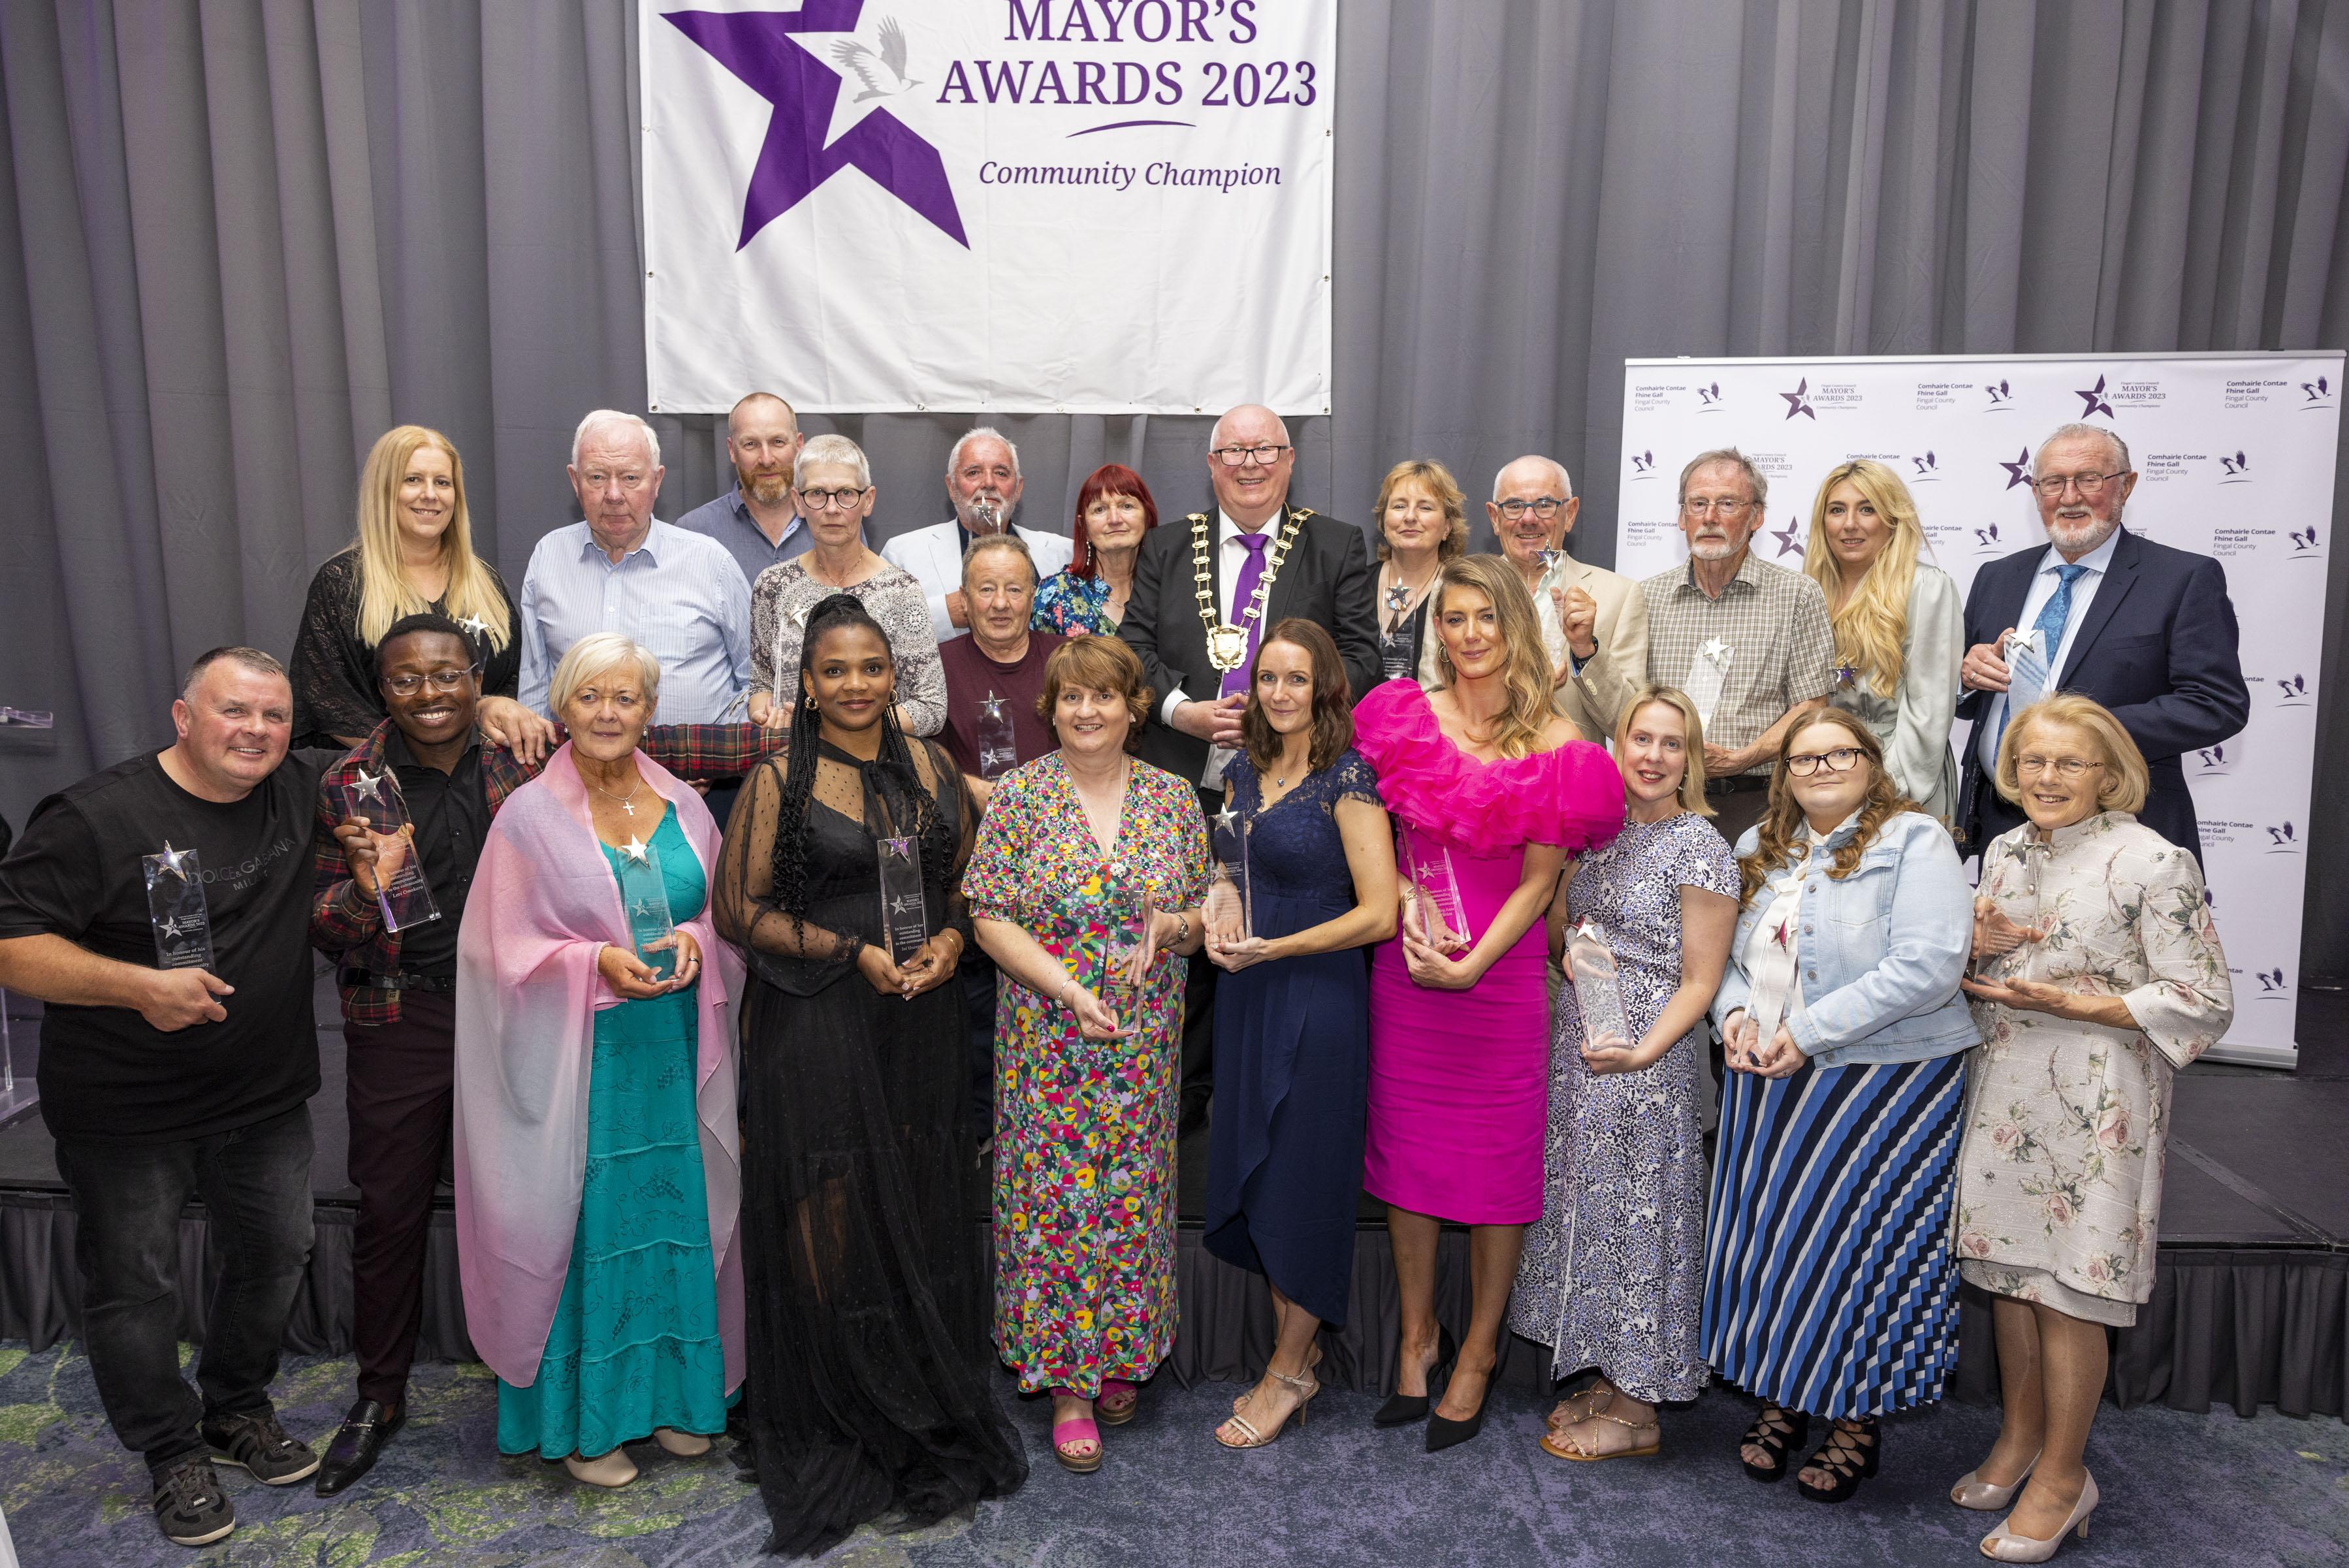 Mayor of Fingal, Cllr Howard Mahony with the winners of the at the Fingal County Council Mayor's Awards 2023, for  Community Champions, at the Crowne Plaza Hotel, Blanchardstown, Dublin 15.